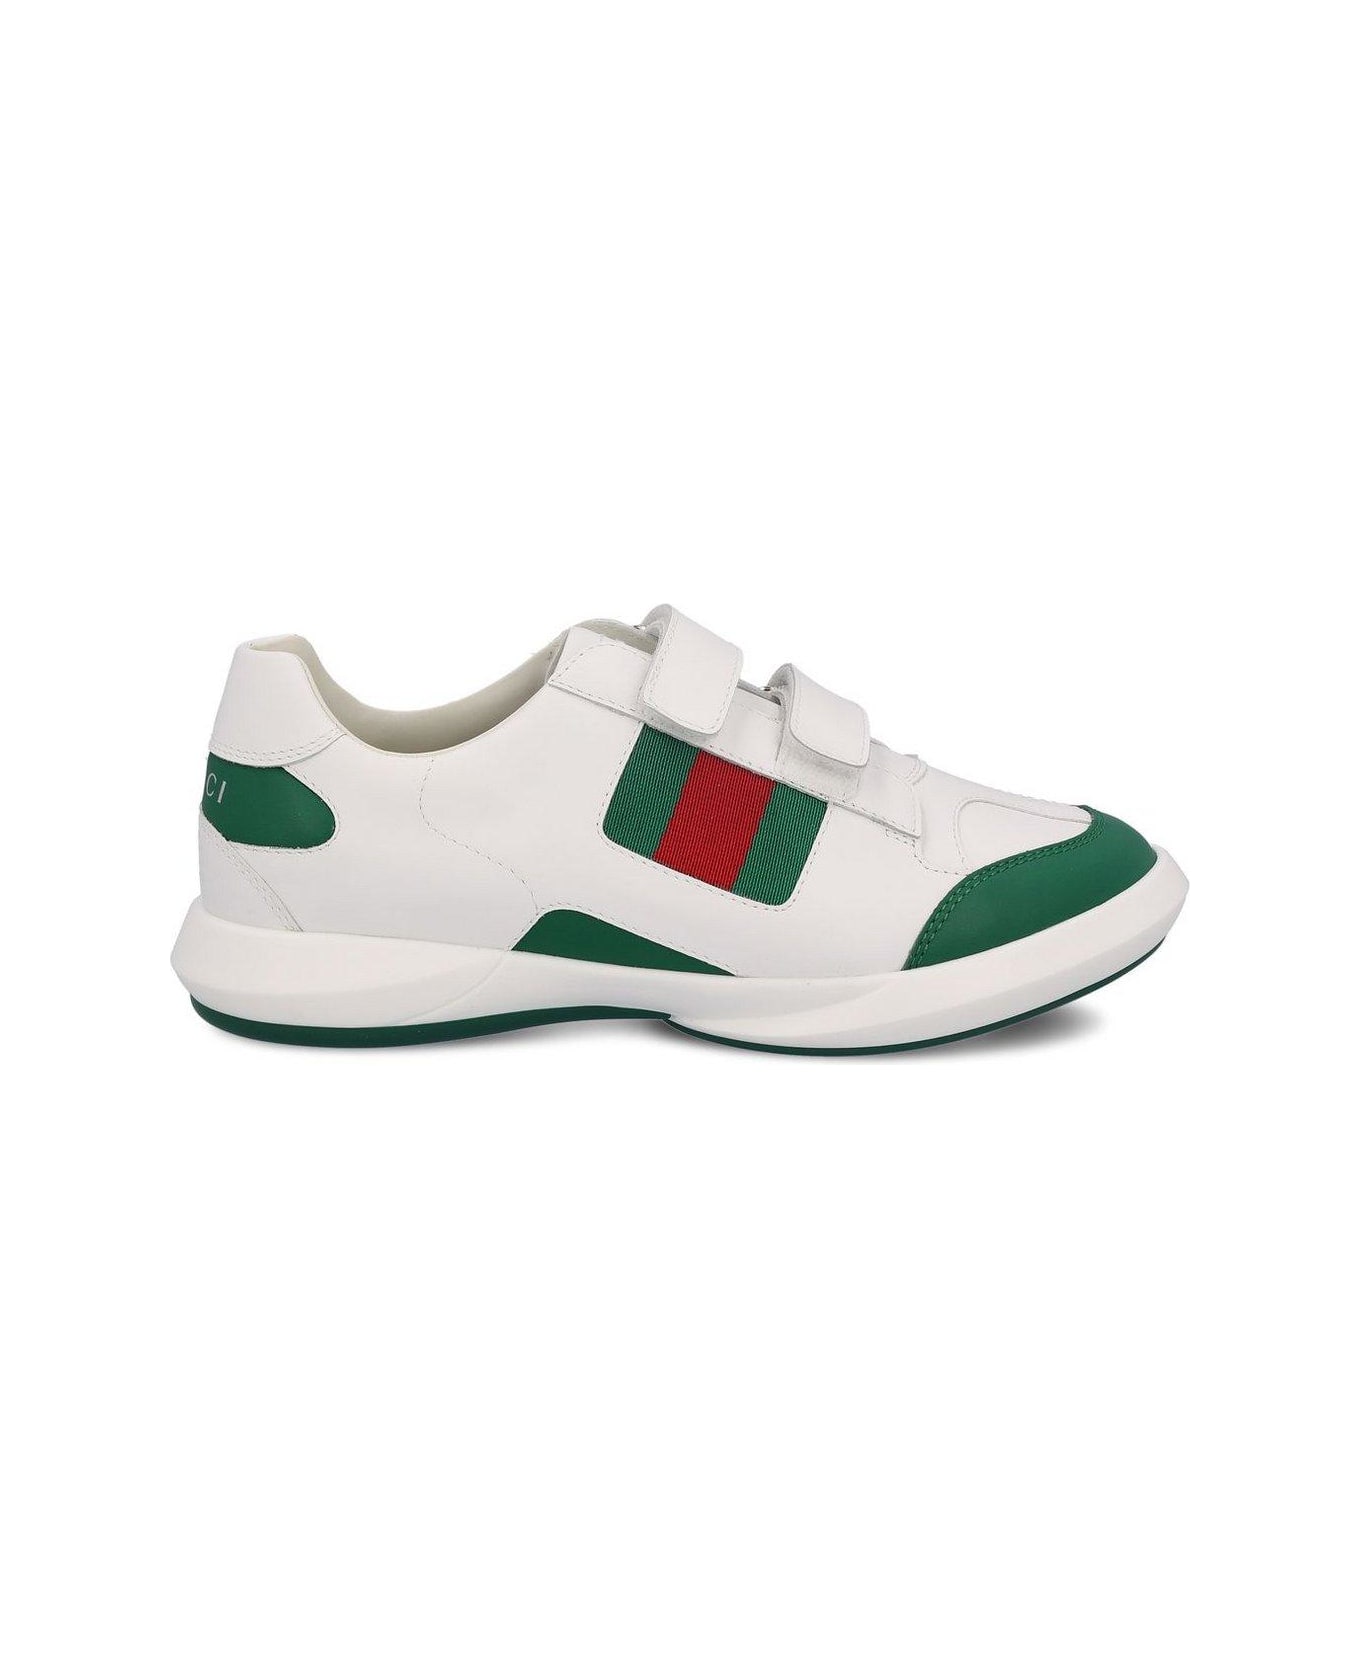 Gucci Logo Printed Round Toe Sneakers - White